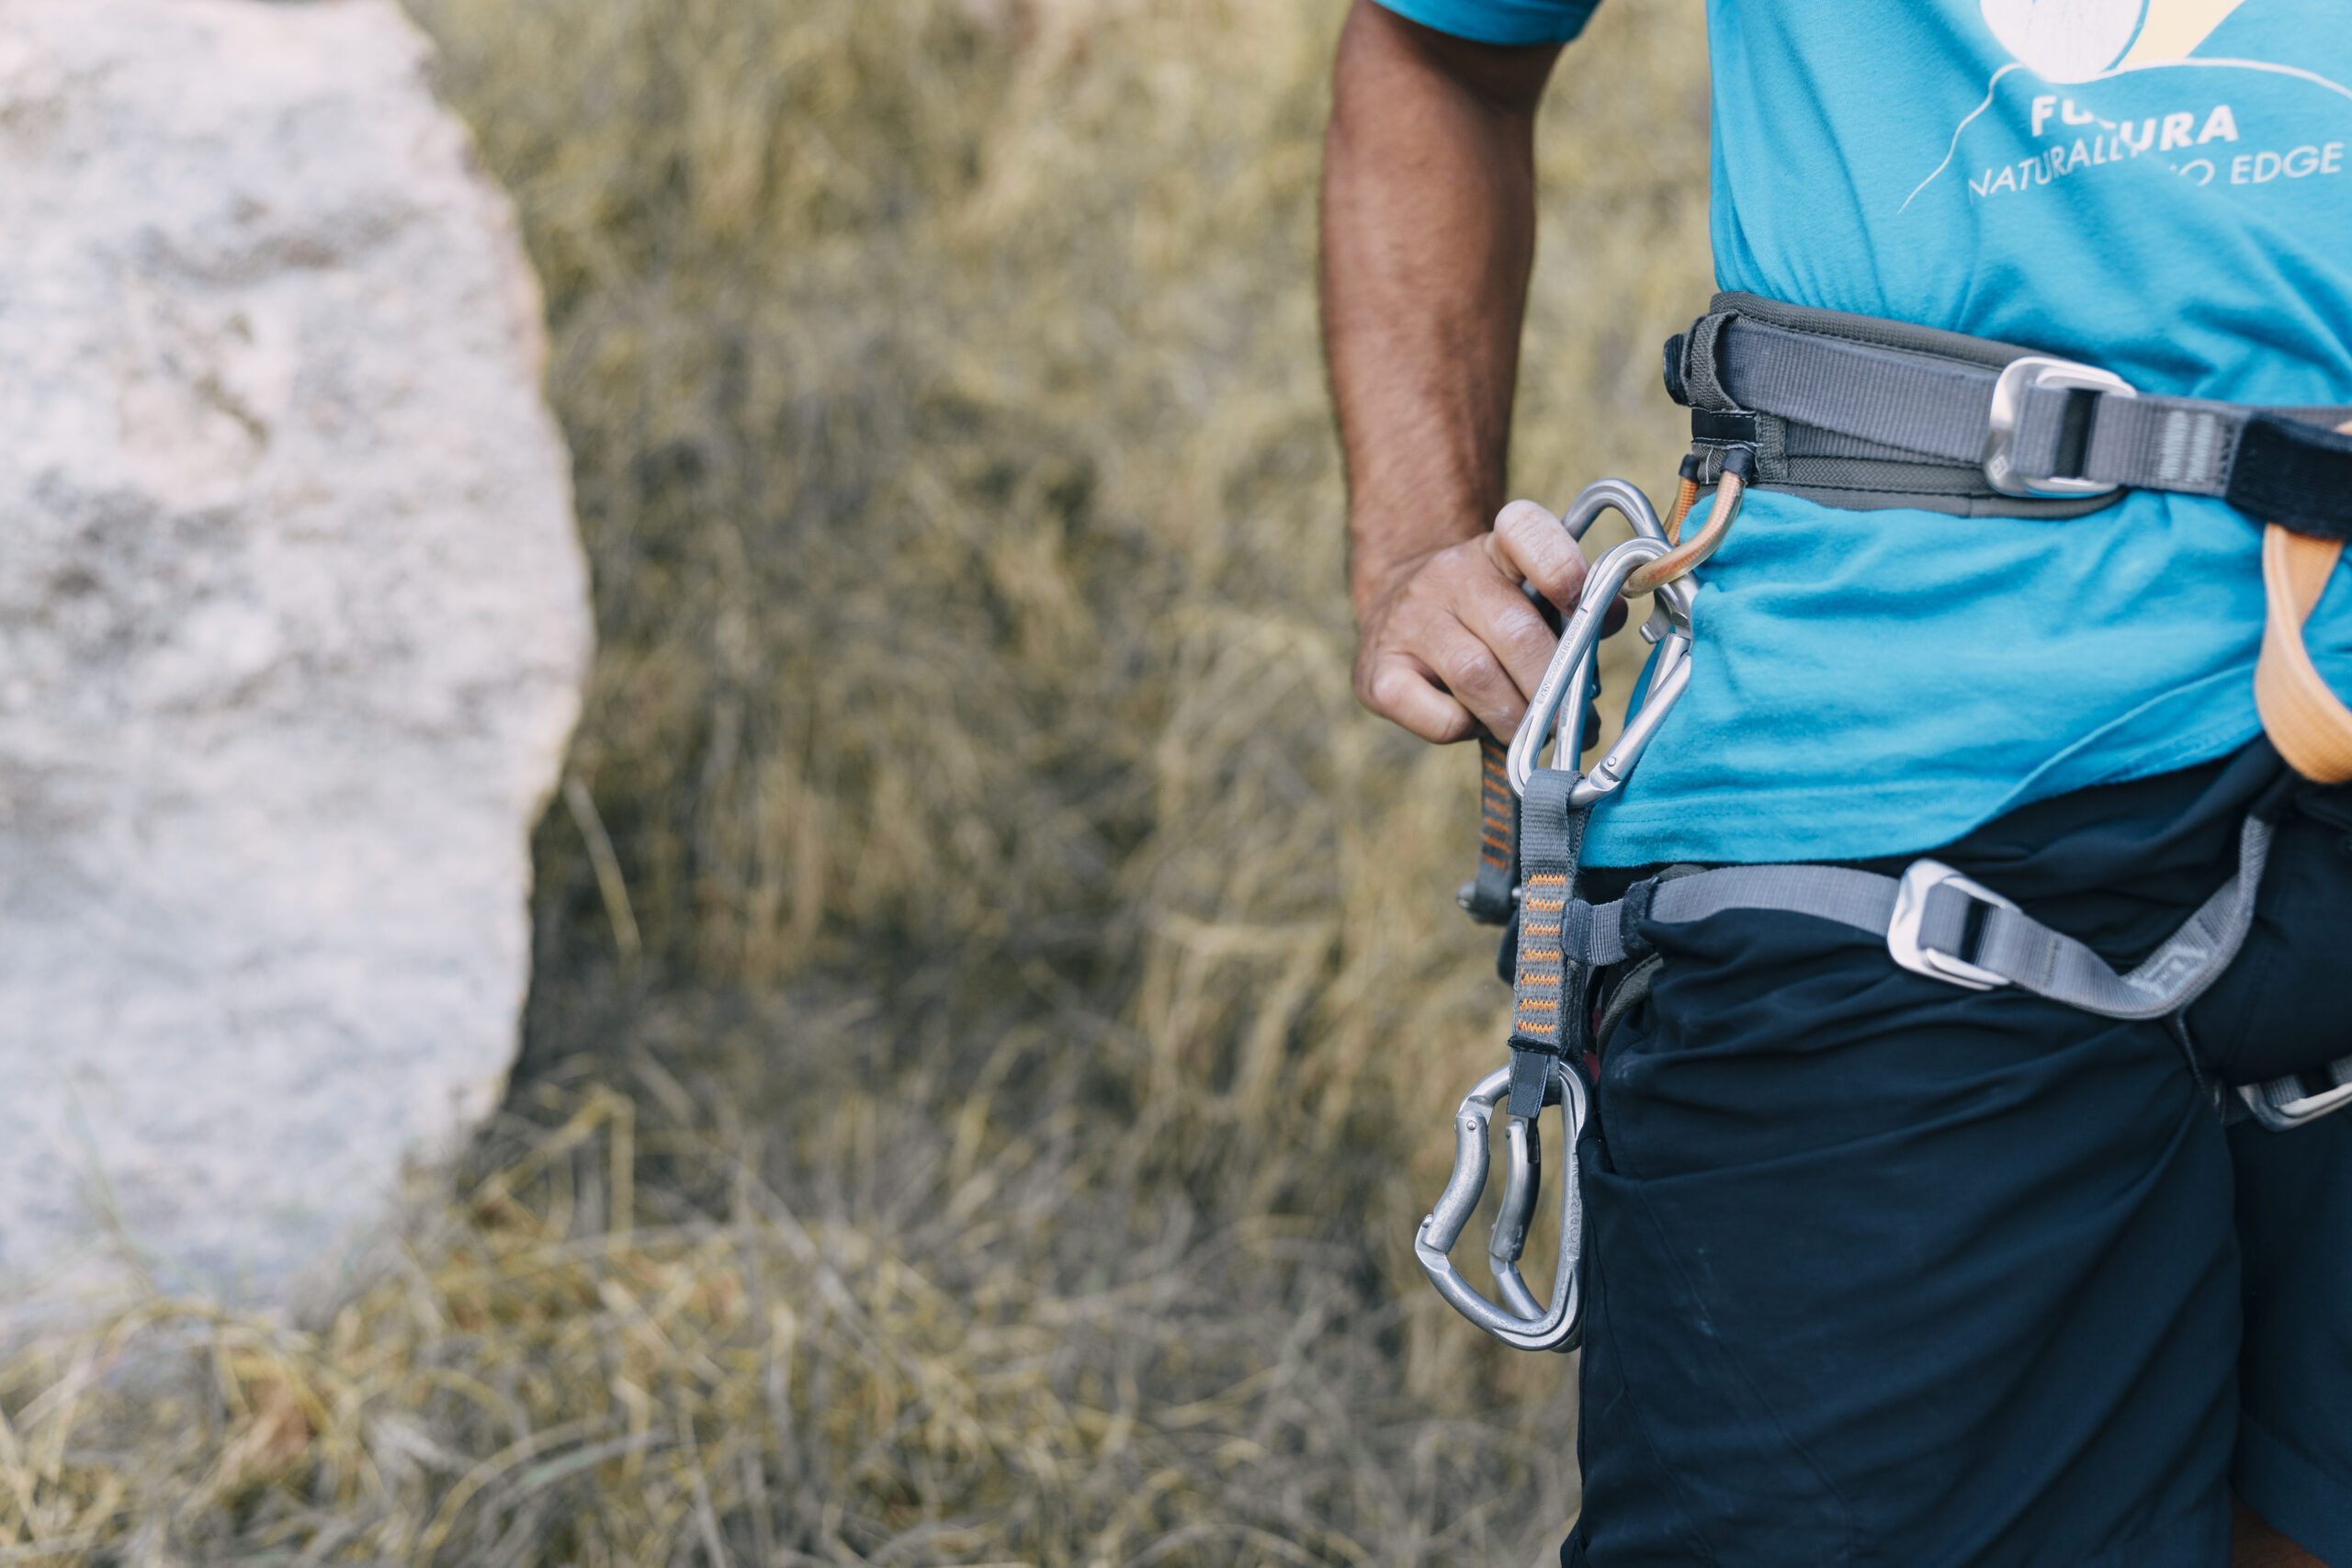 A close-up photo of a GriGri device in use during a rappel, showcasing the innovative camming mechanism that allows for easy speed control and extra safety for the user.